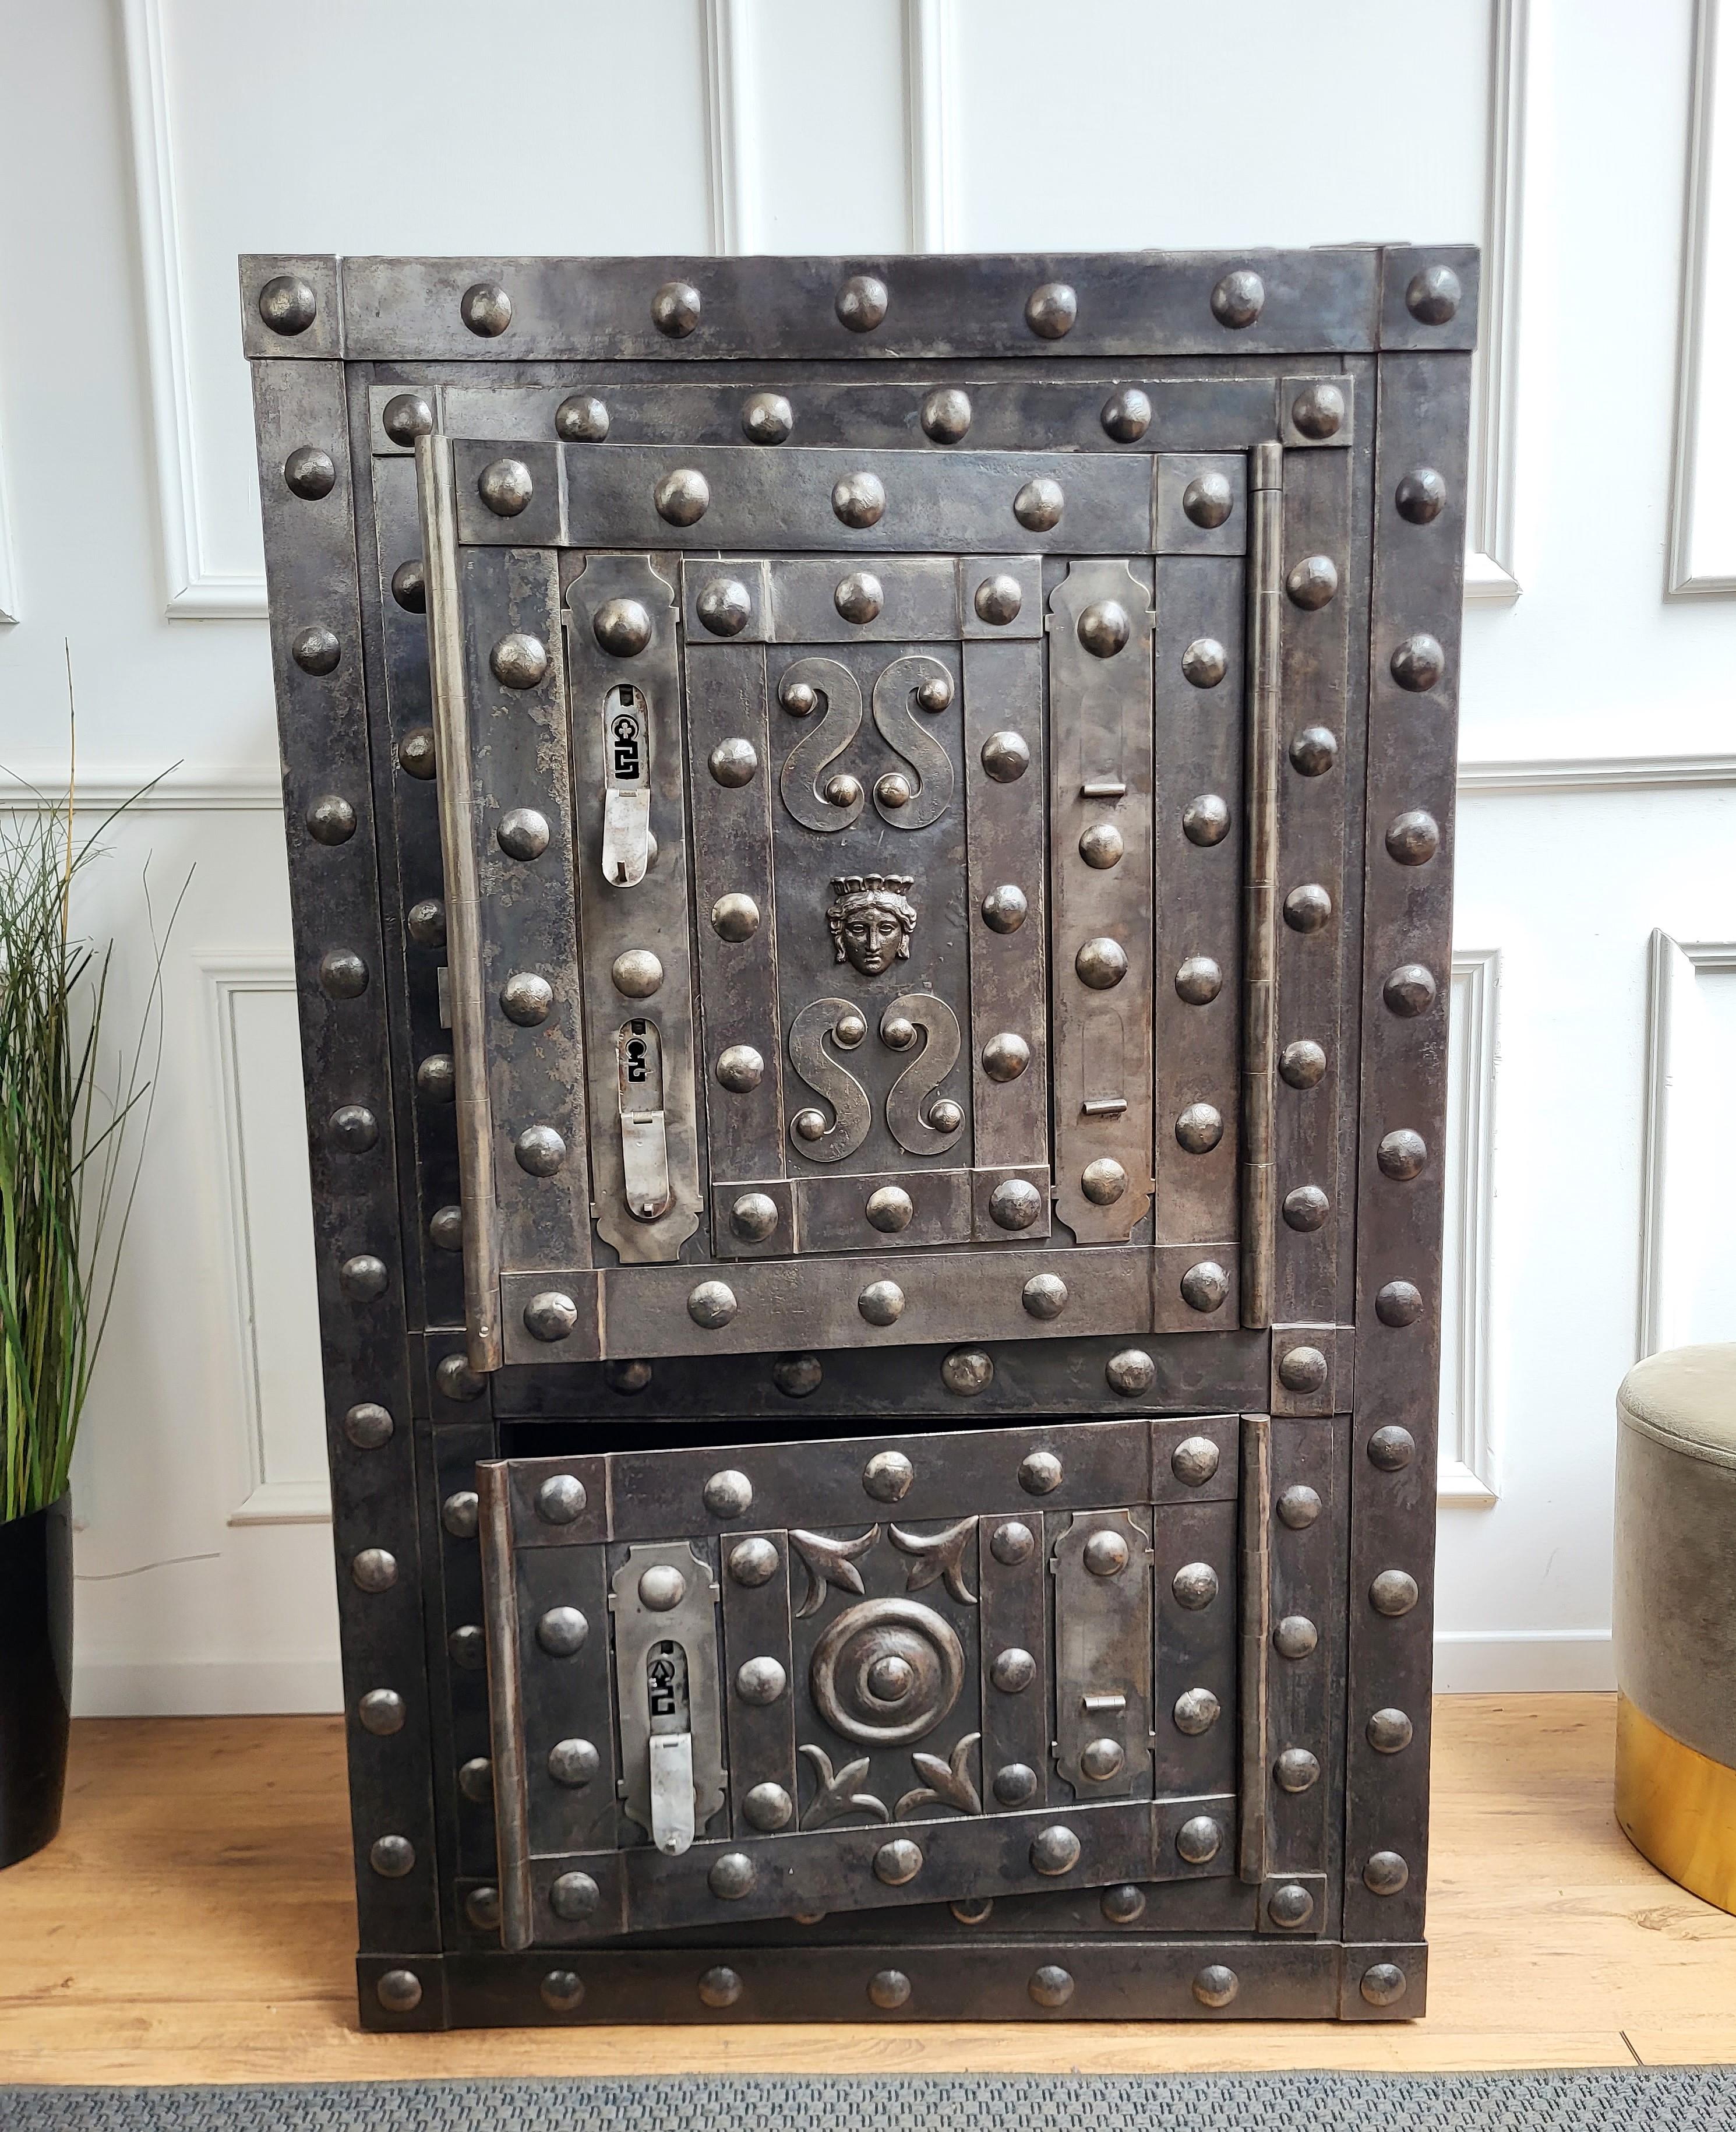 Beautiful and very rare example of early 18th / late 17th century Italian master blacksmith craftsmanship, this antique studded safe with typical all-around hobnails and great wrought iron details, has a fabulous central facial decor with side